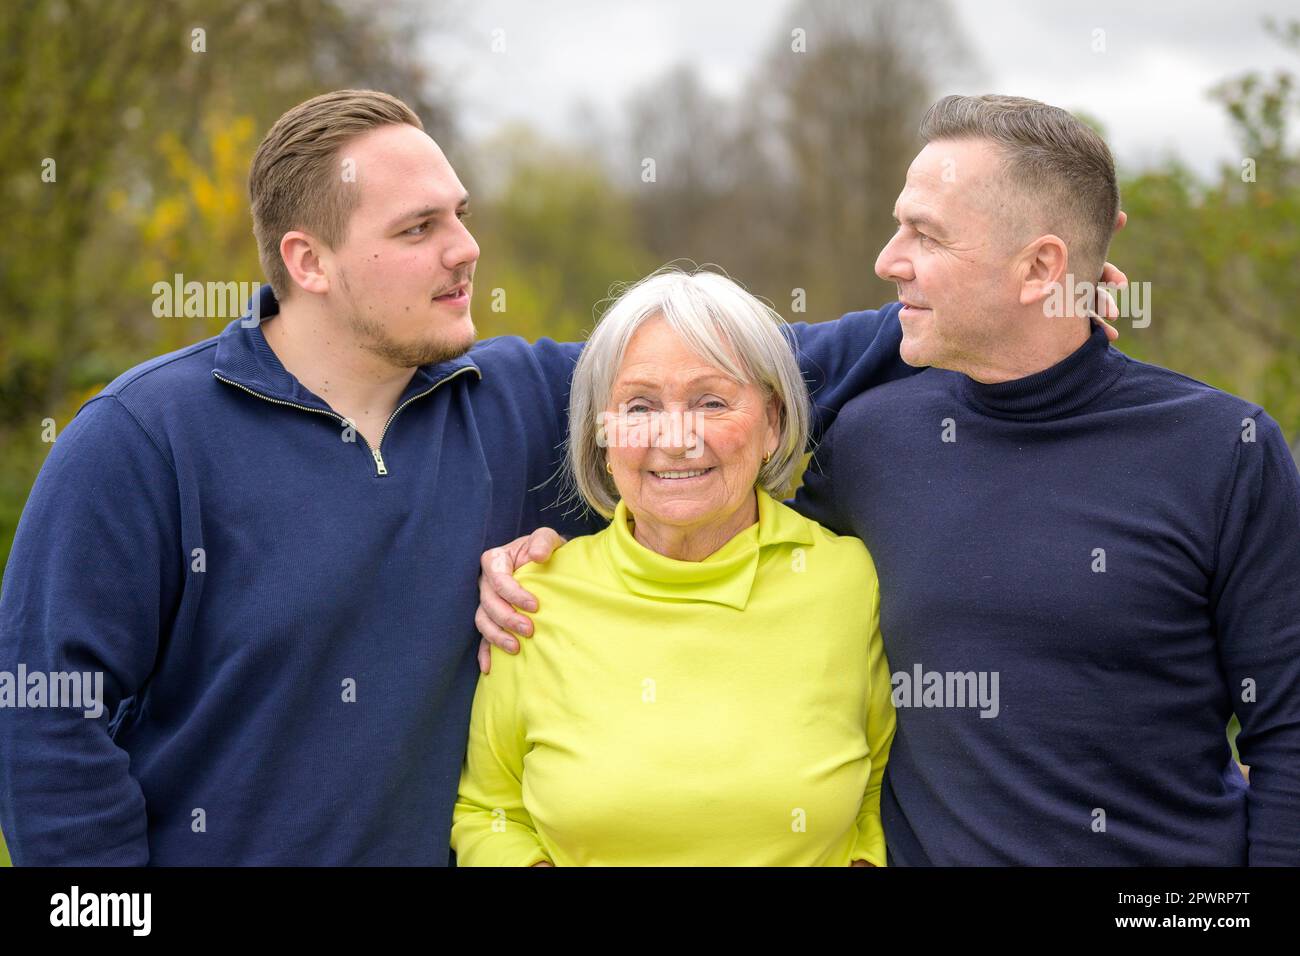 Three generation family, grandmother, son and grandson hold each other's arms and father and son look at each other Stock Photo